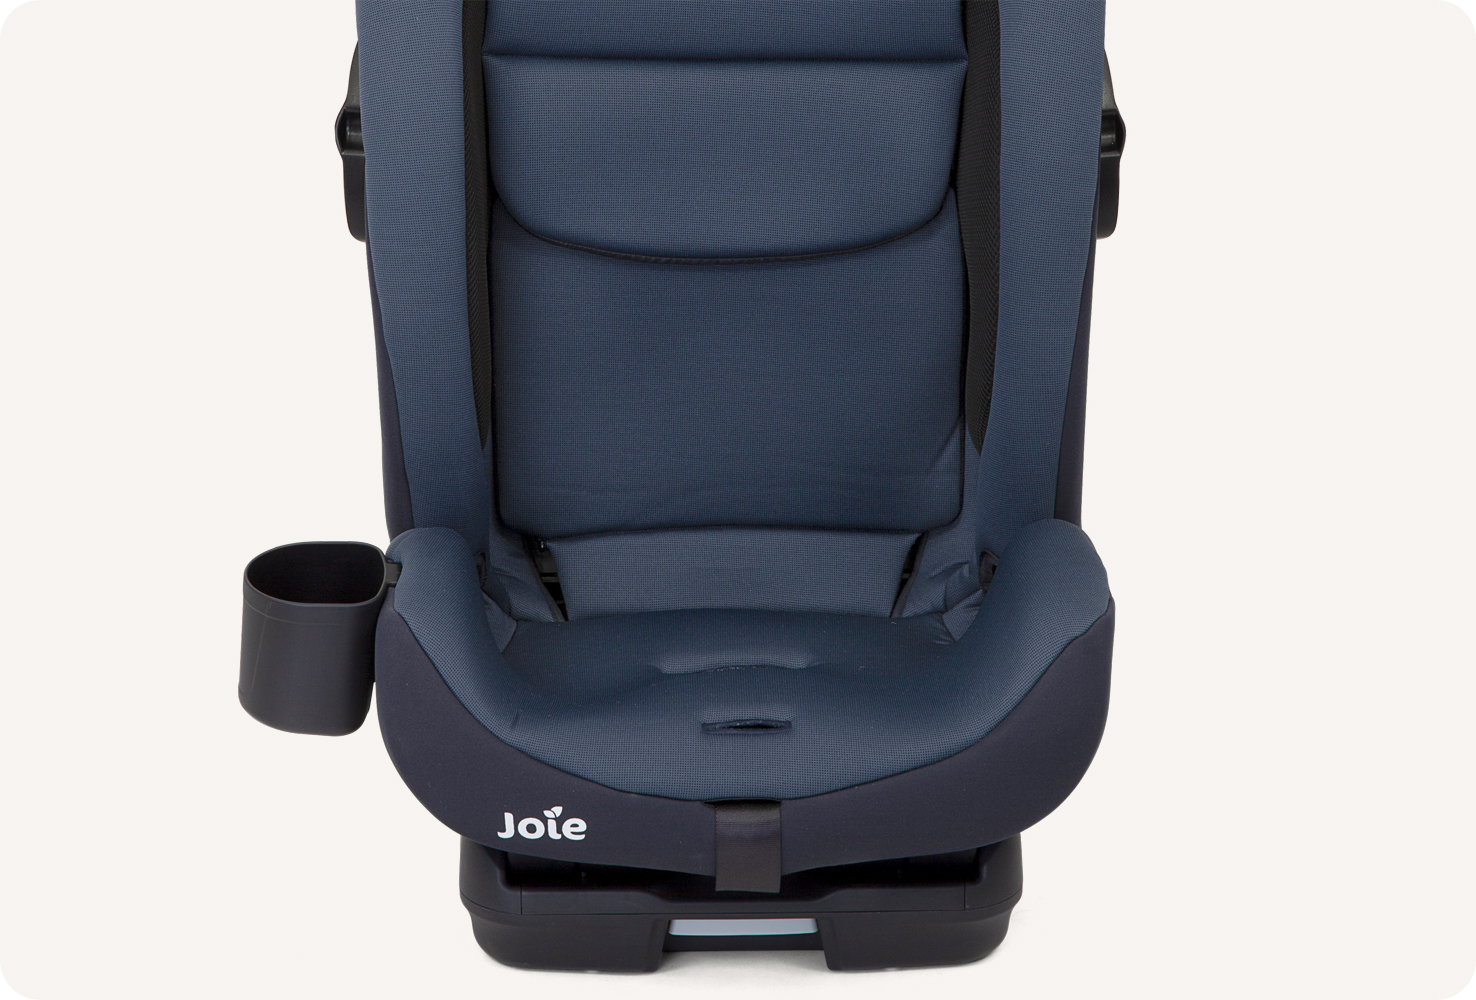 Close-up of the lower half of a dark blue Joie bold toddler car seat to show the attached cup holder.